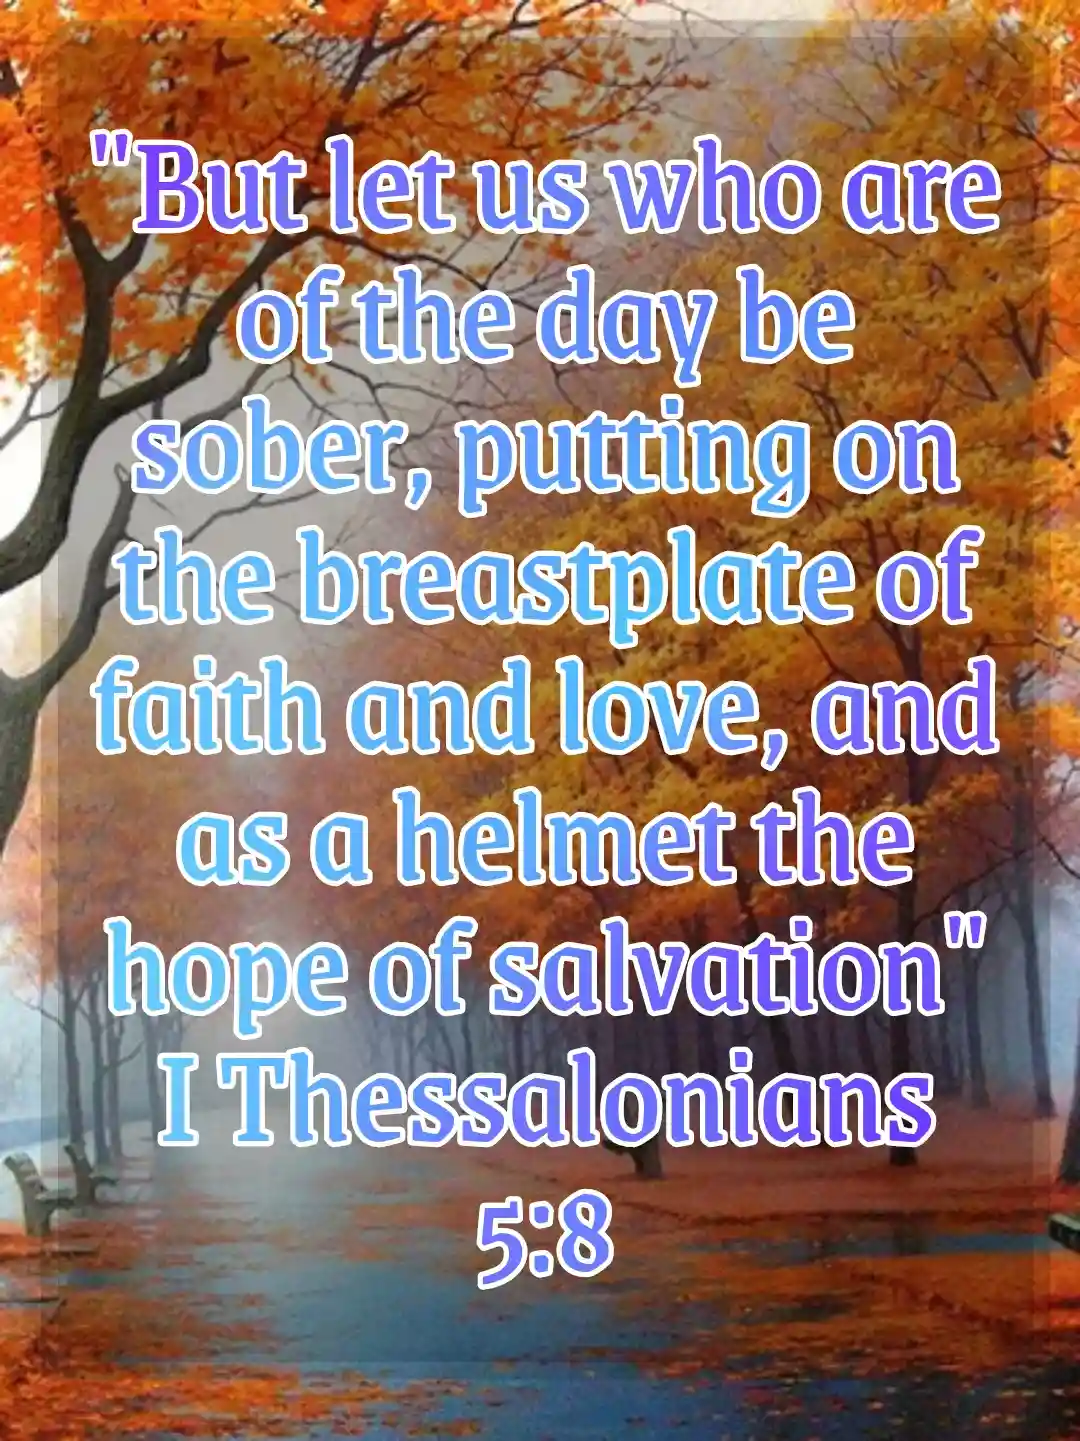 bible verses on faith and hope (1Thessalonians 5:8)